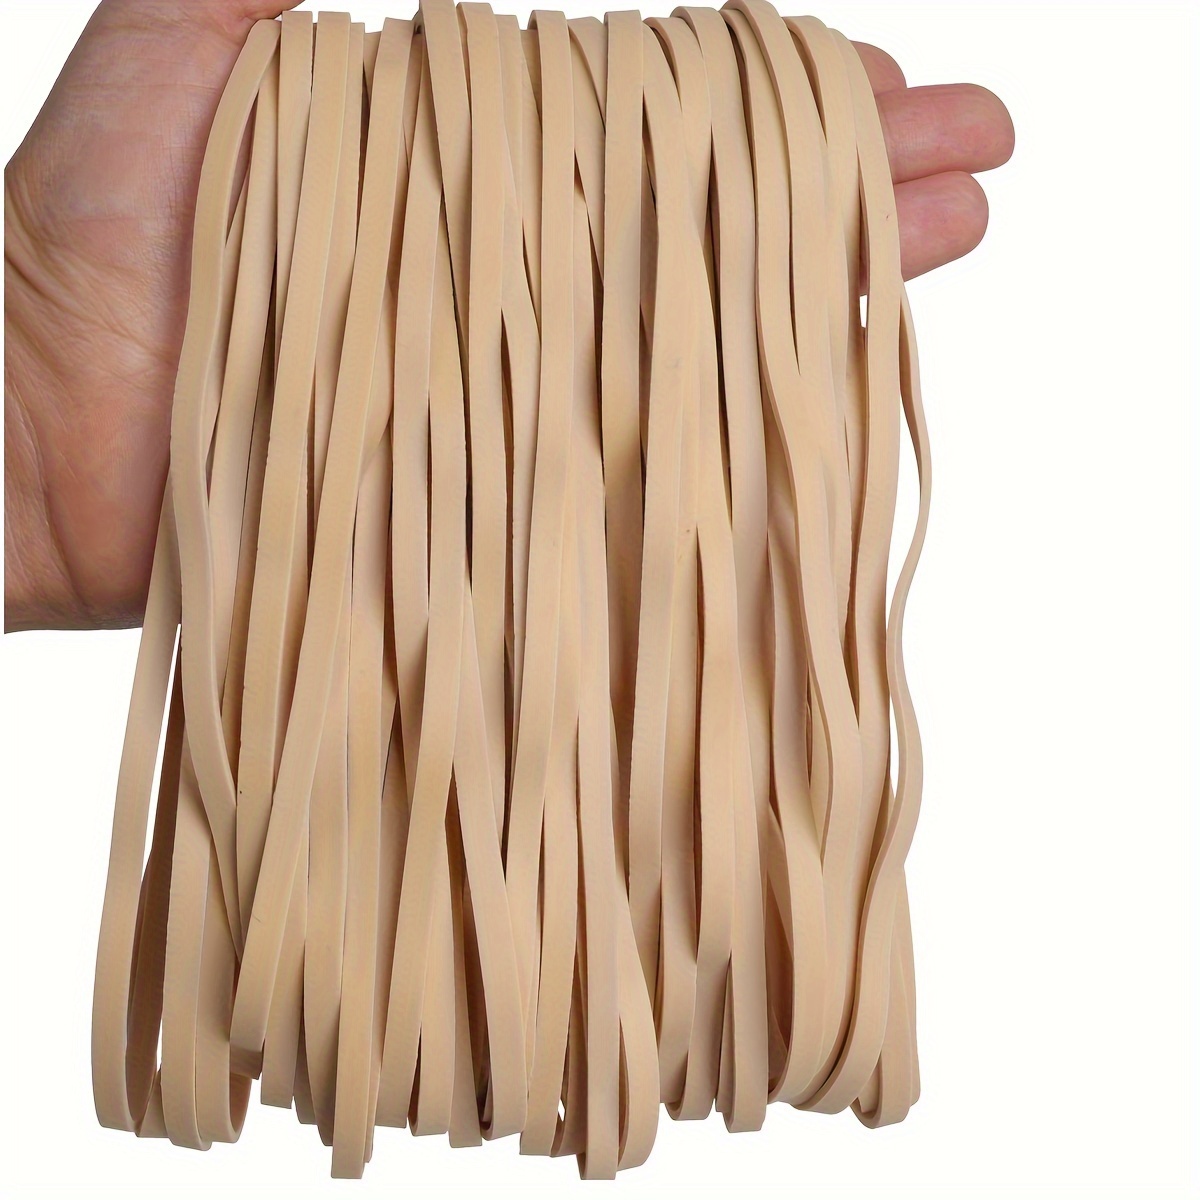 

40 Pack Large Beige Rubber Bands - Synthetic Rubber, 7 Inch (18cm) Length, 0.06 Inch Thickness, 0.15 Inch Width - Office Supplies, Home Use